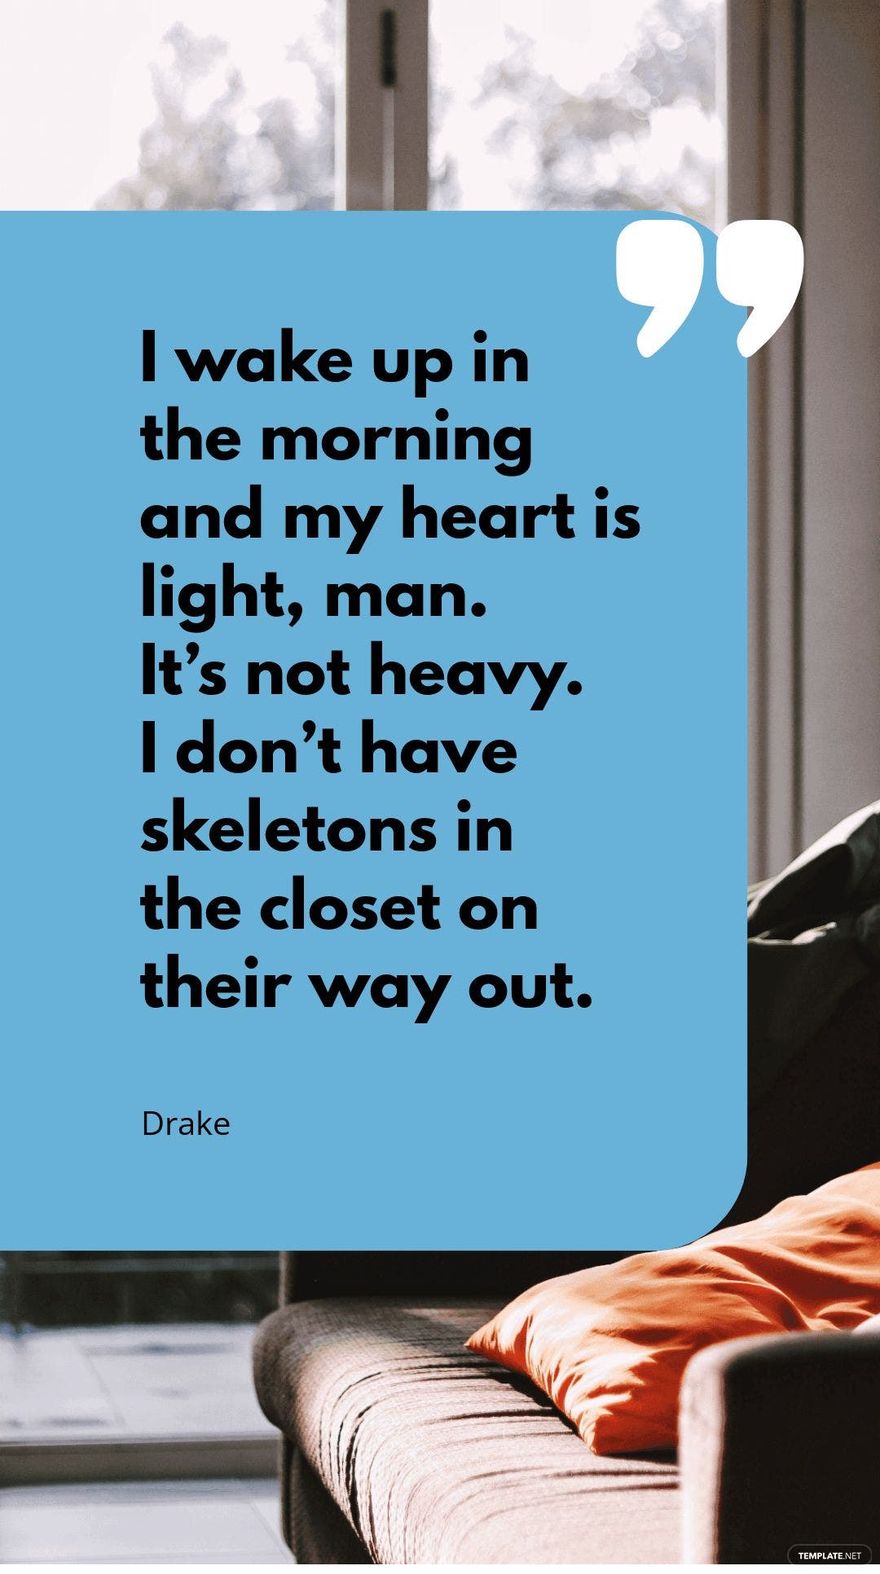 Drake - I wake up in the morning and my heart is light, man. It’s not heavy. I don’t have skeletons in the closet on their way out.